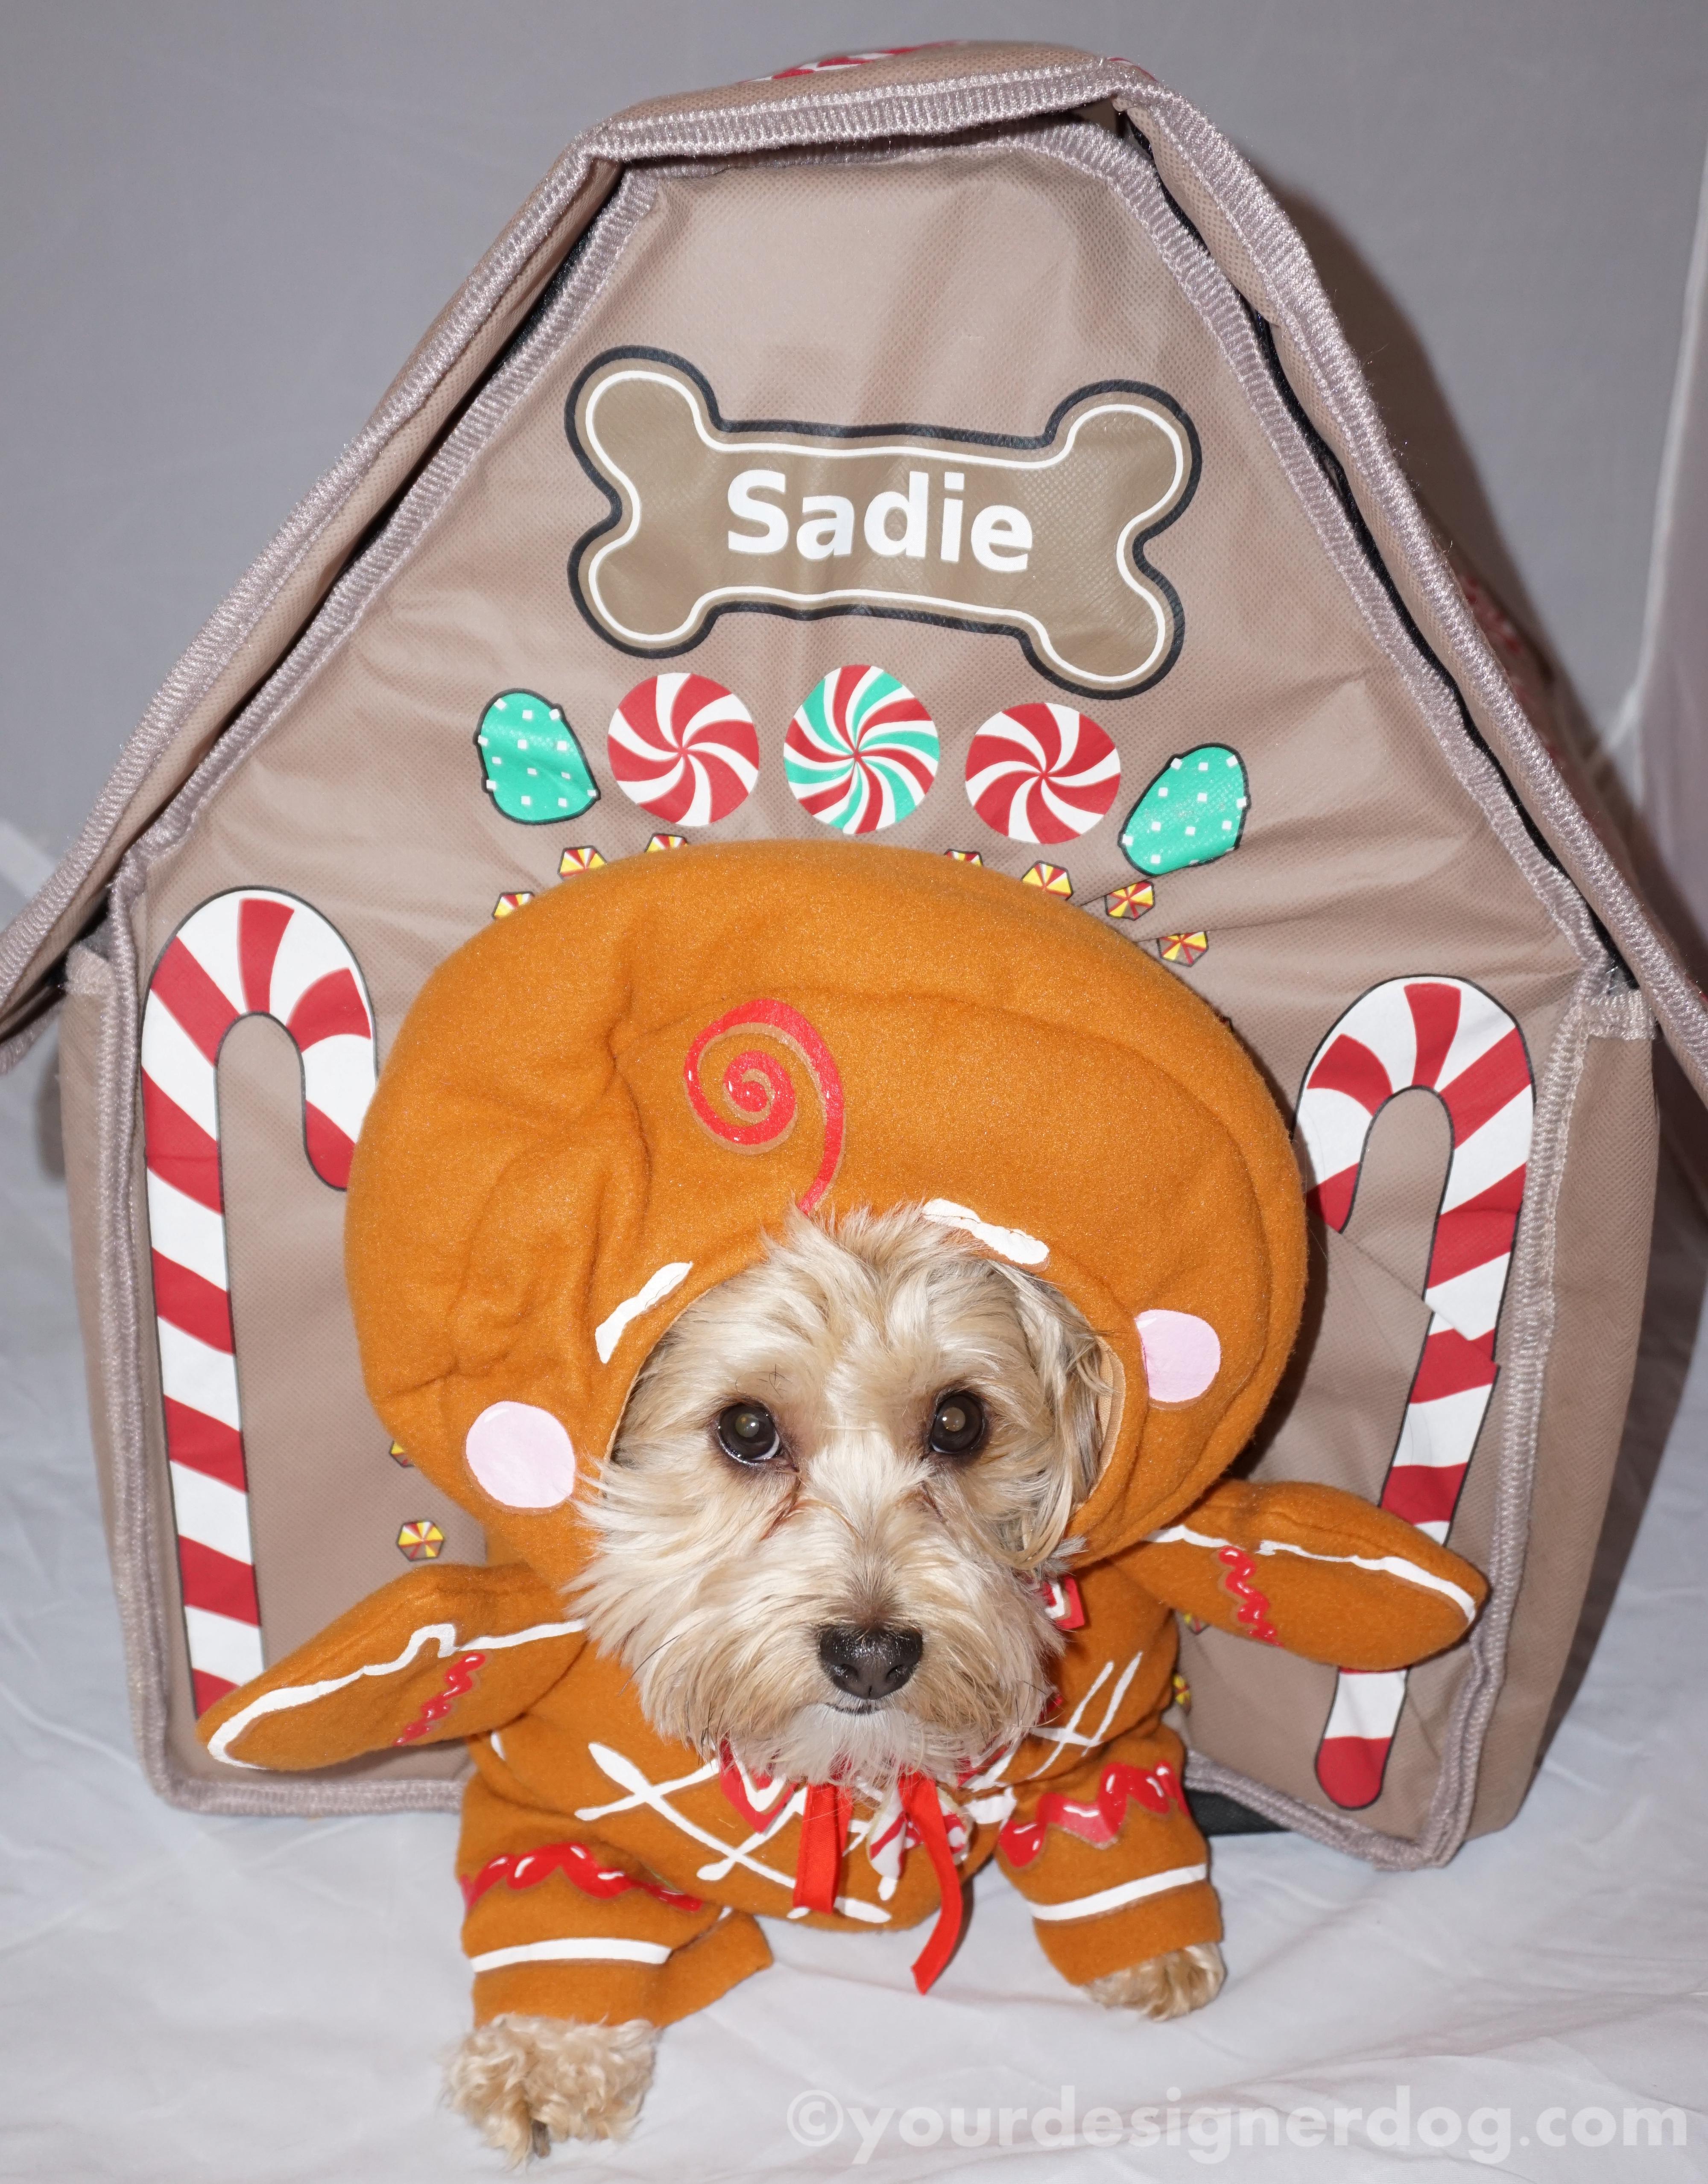 dogs, designer dogs, yorkipoo, yorkie poo, gingerbread house, dog house